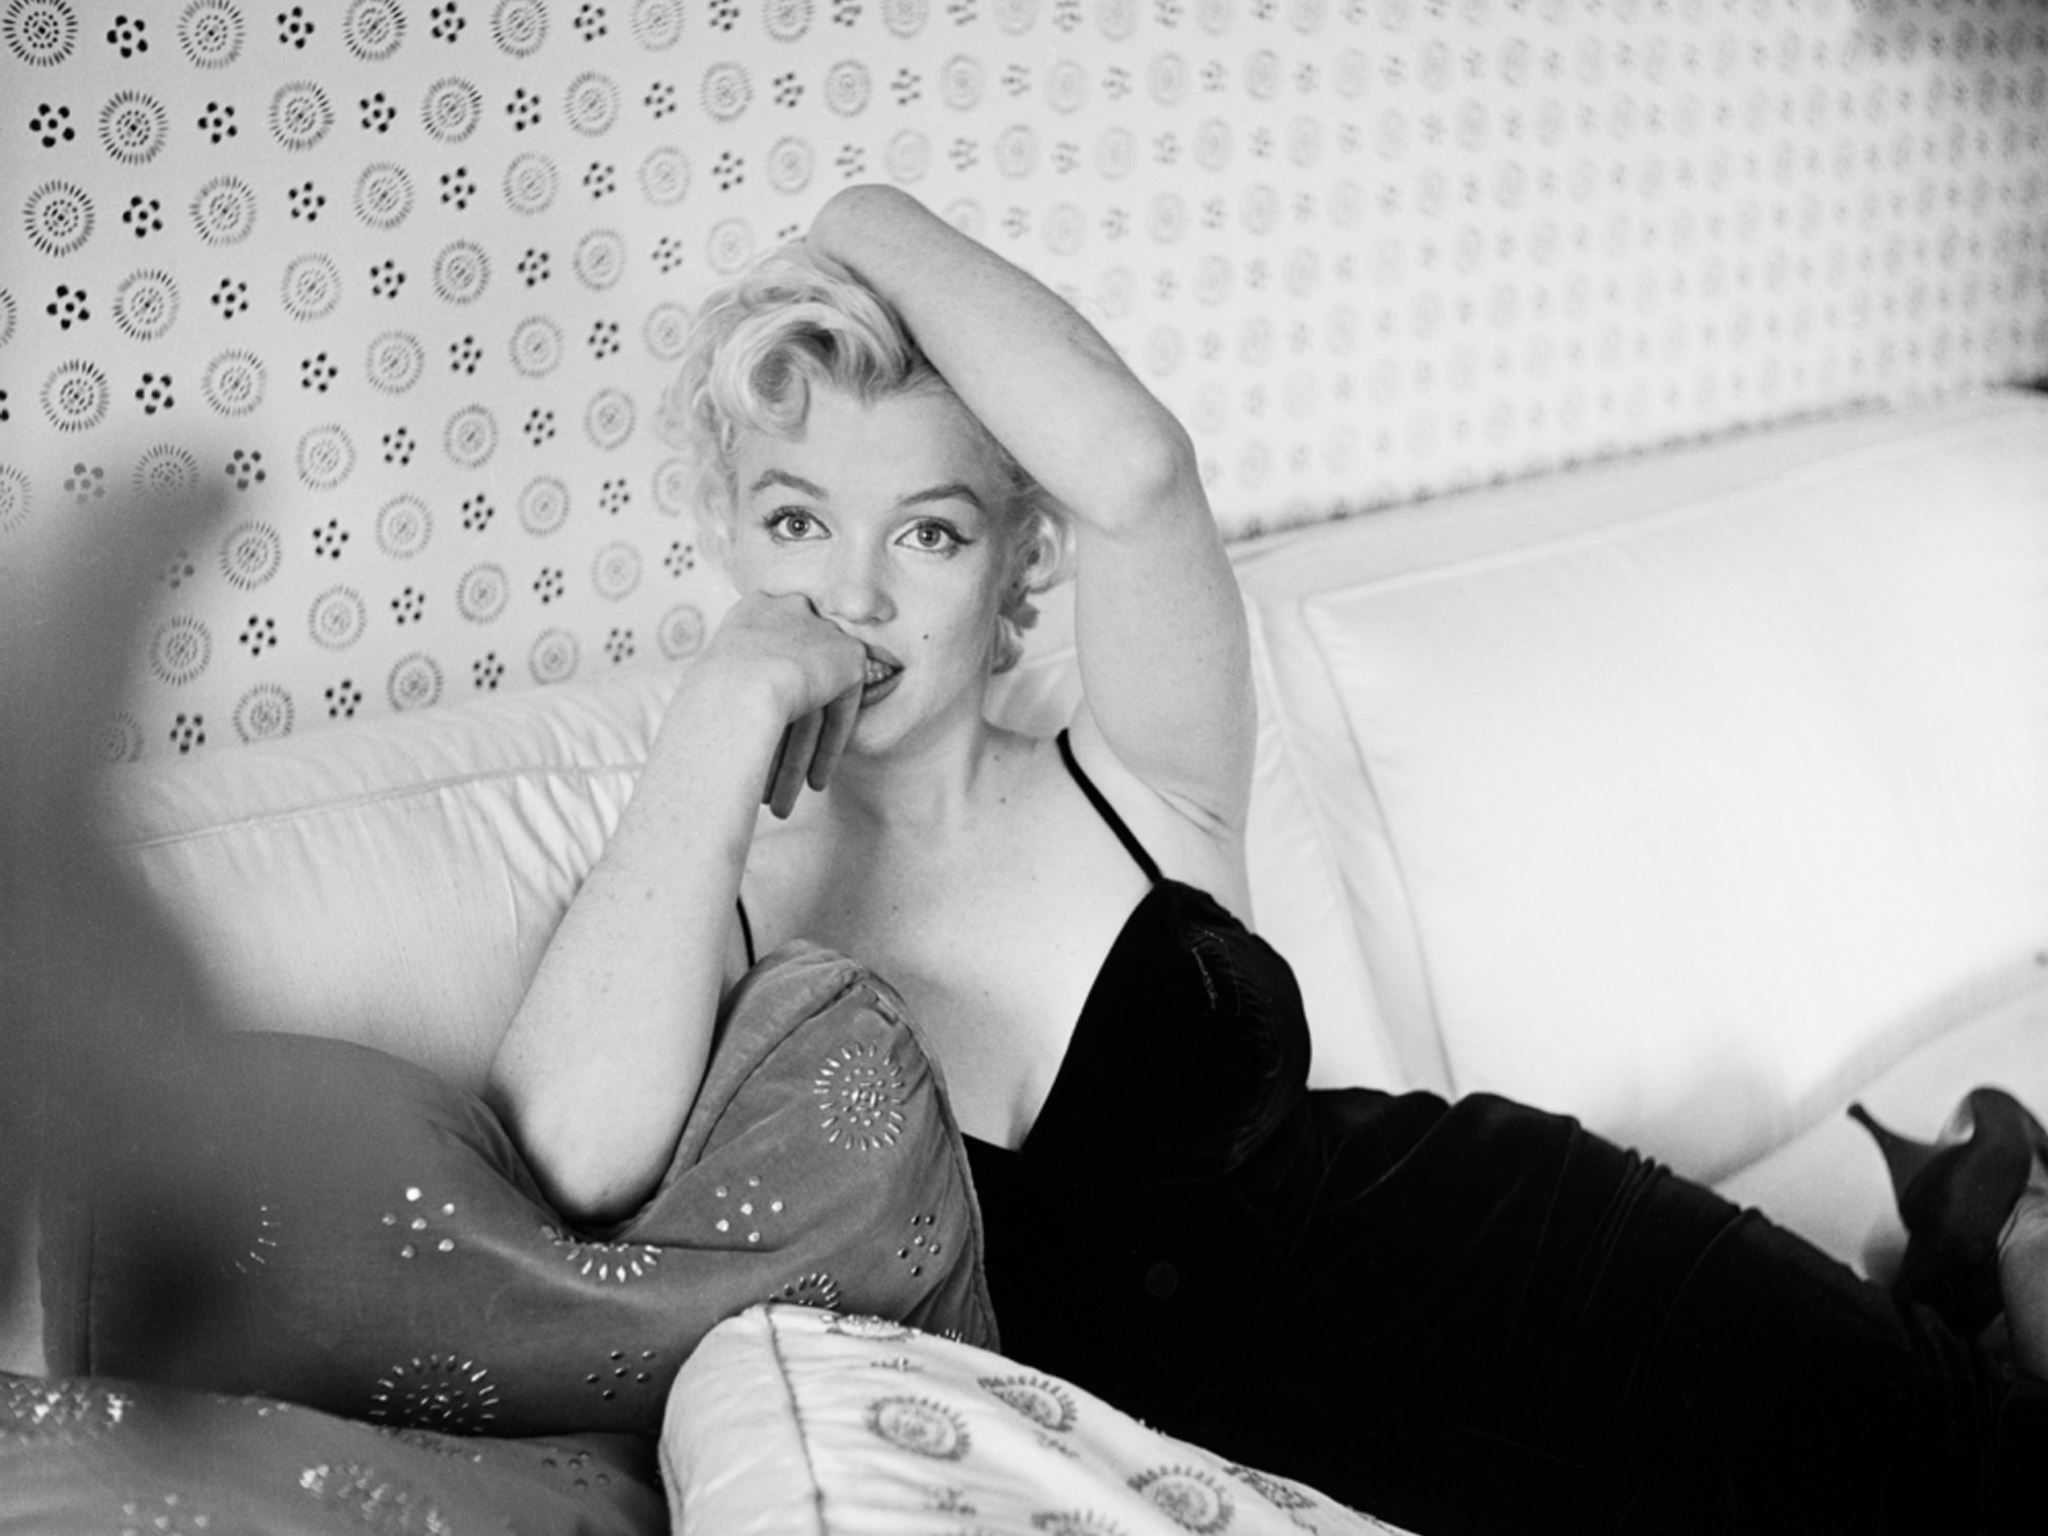 Photograph of Marilyn Monroe taken by Cecil Beaton, part of the Marilyn: Celebrating an American Icon exhibition showing at MAMA in 2016